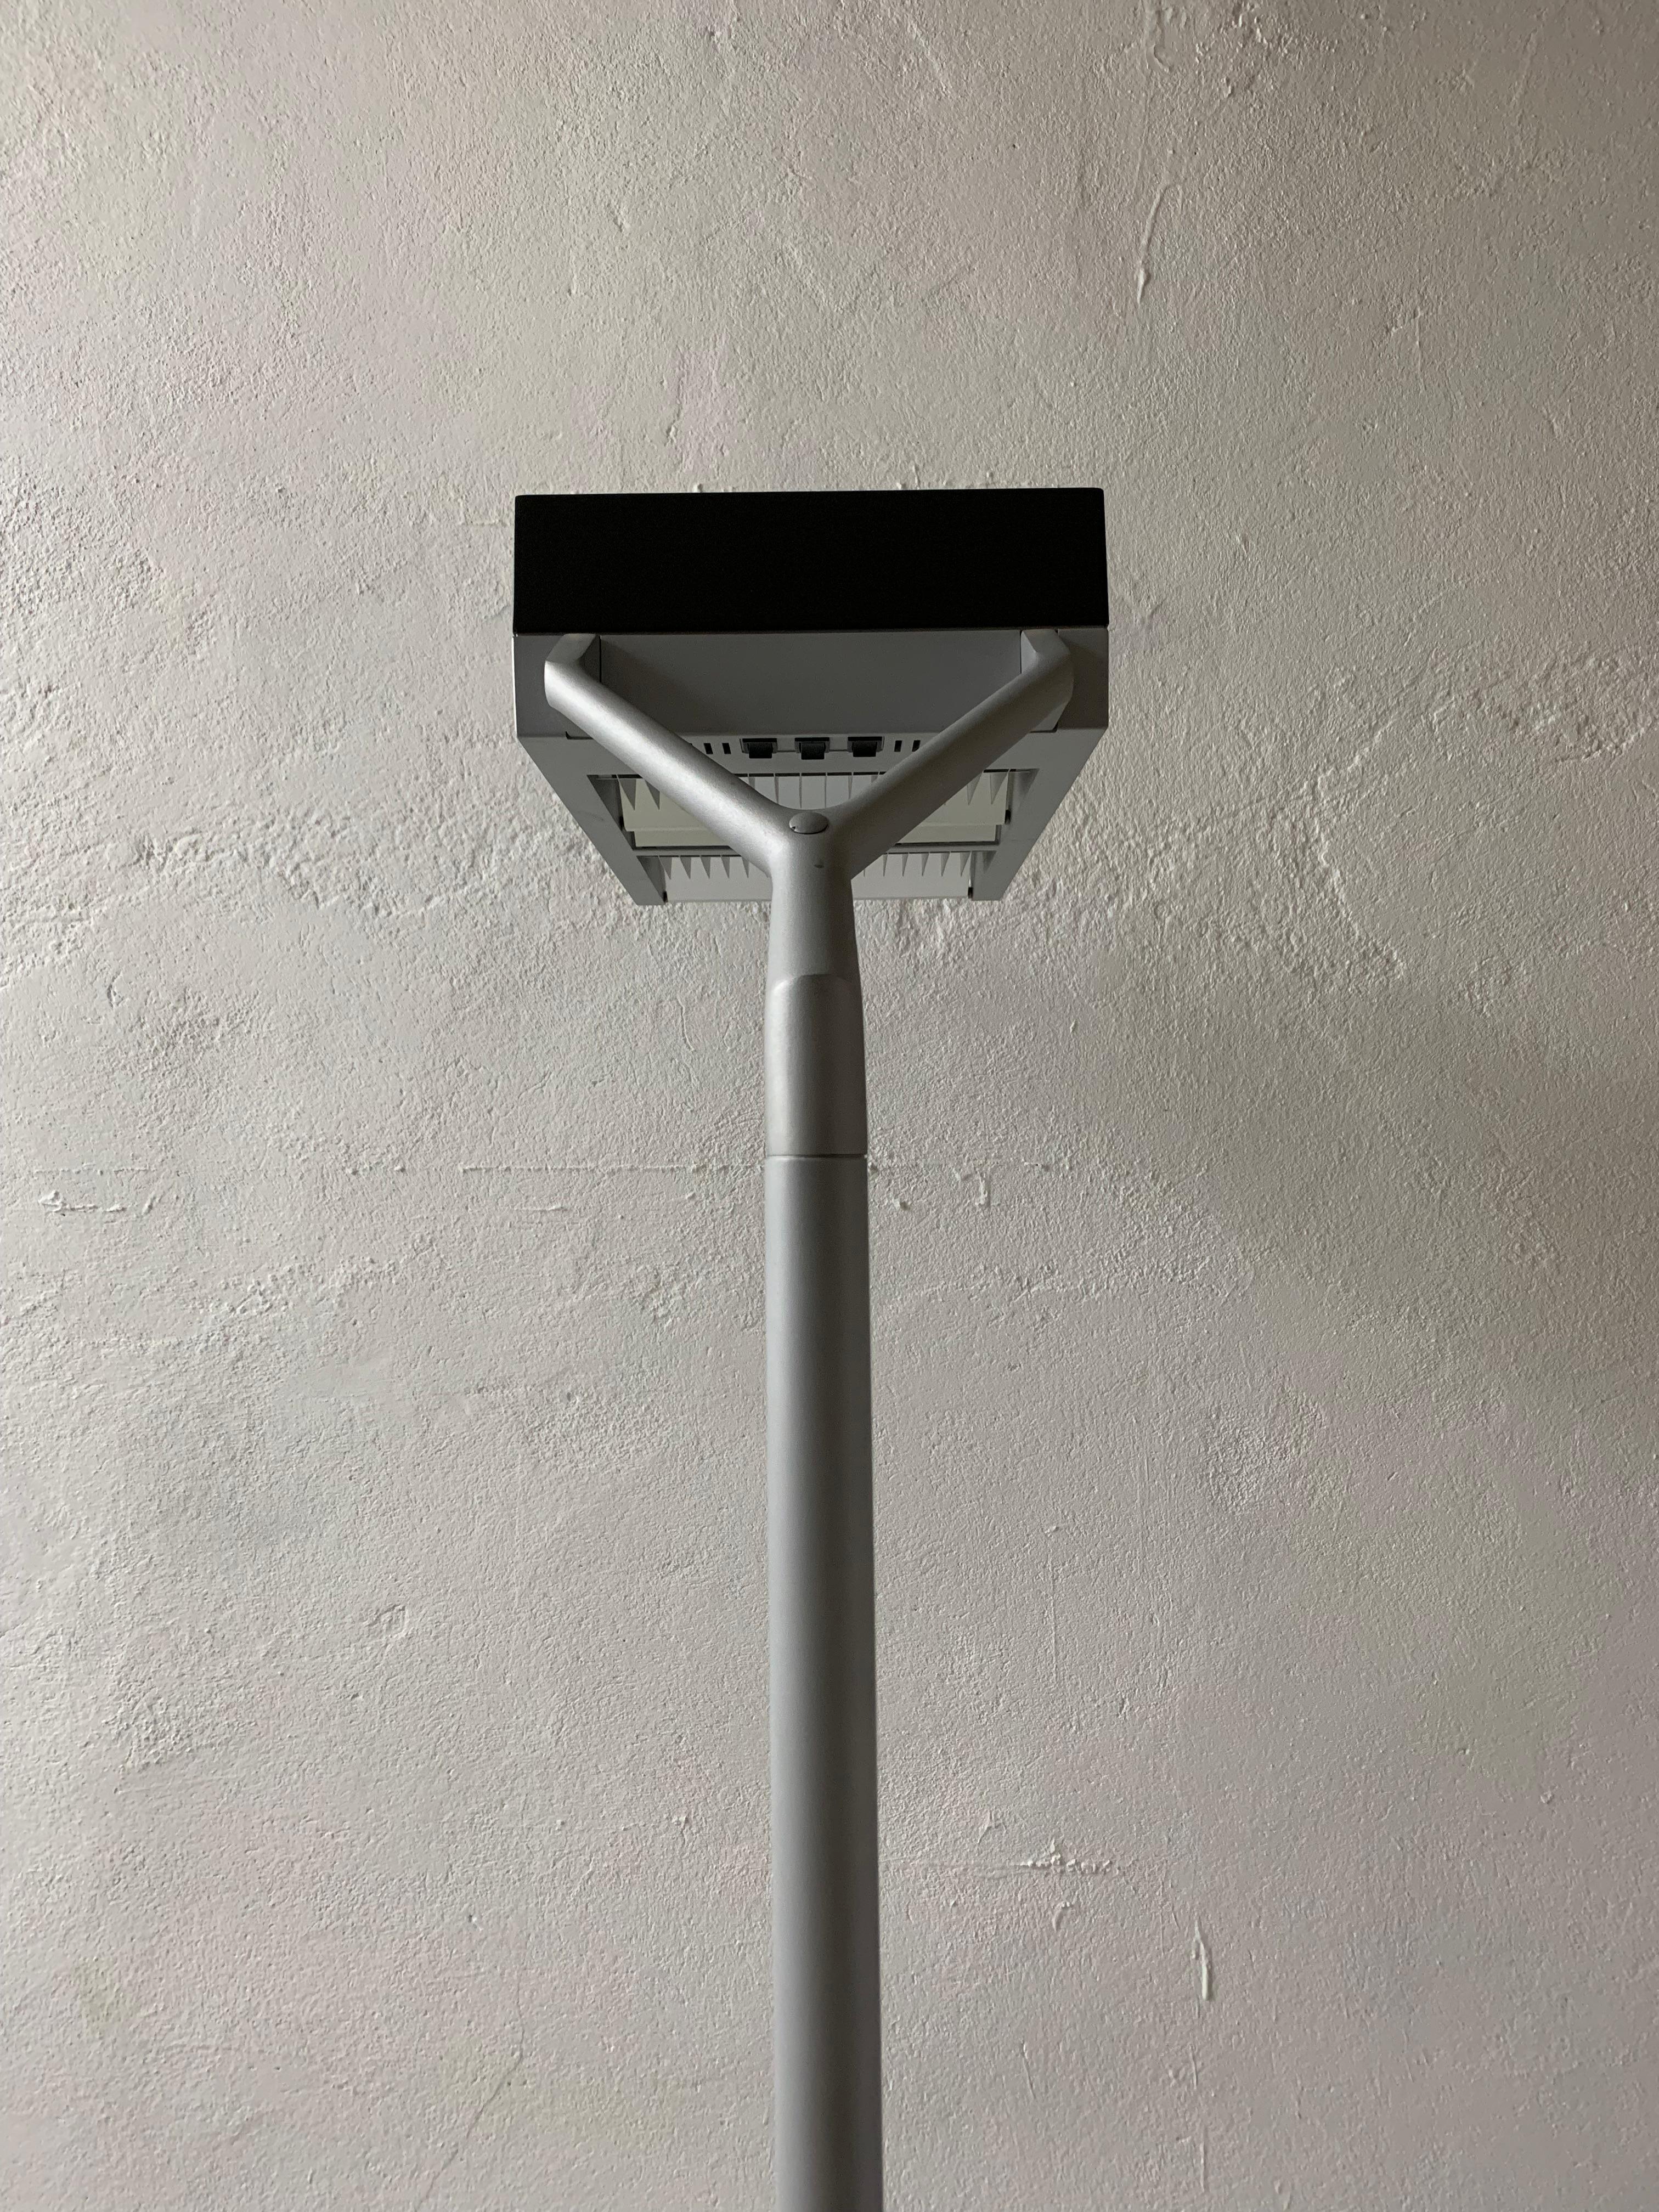 Vintage industrial “Quadra BID” office lamp designed by Glen Oliver Löw and Antonio Citterio in 1994 for Vitra Ad-Hoc office system, lamp produced by Ansorg. Minimalist solid design with 3 light sources - upper/1 bottom/2 bottom - check the photo.